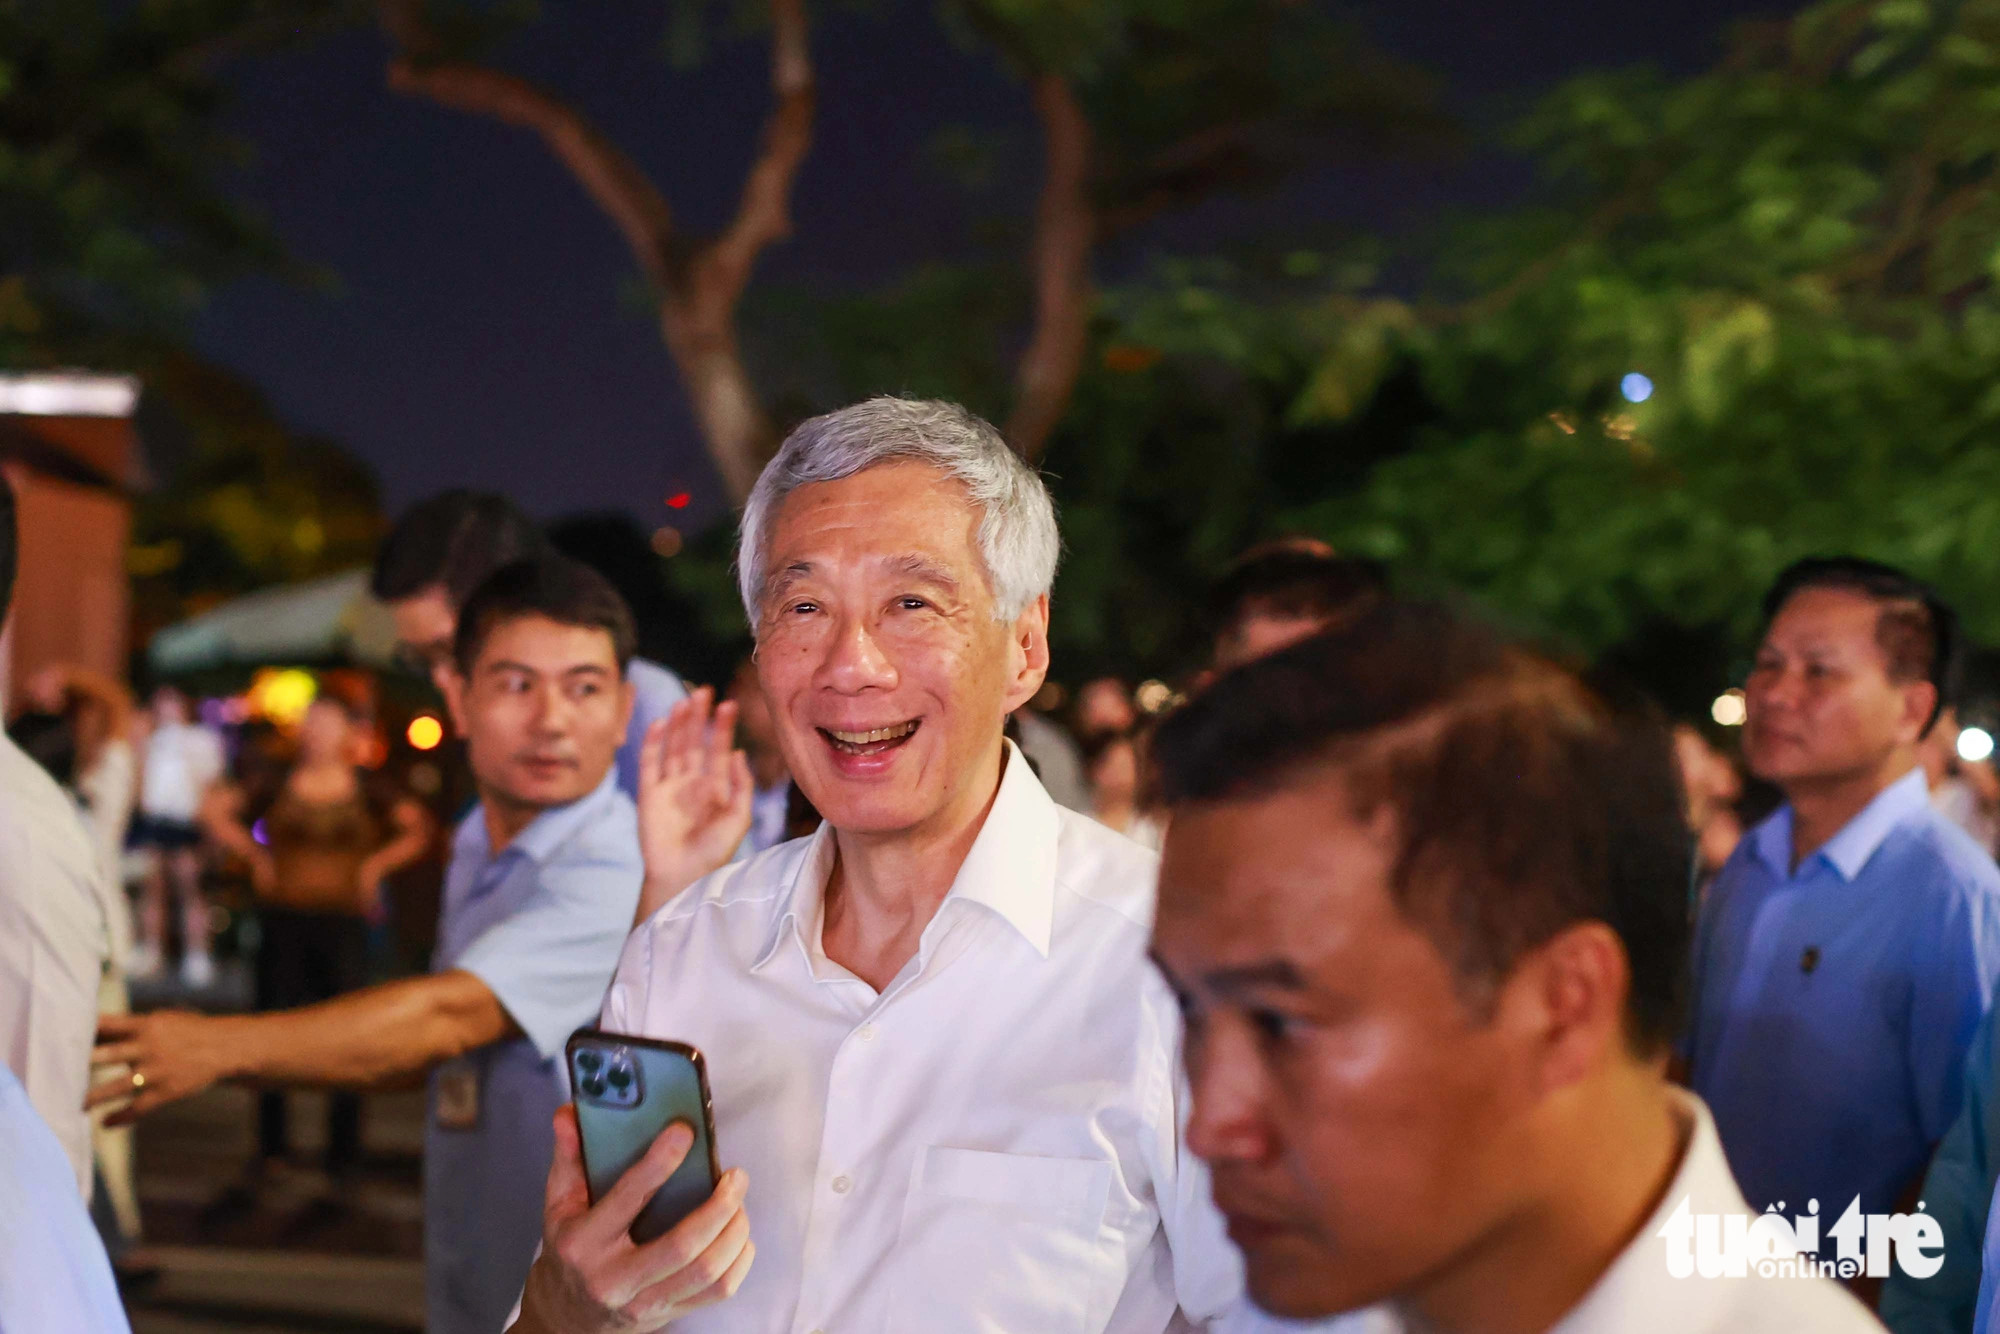 PM Lee Hsien Loong is pictured with a smile during his walk around Hoan Kiem Lake in Hanoi and his cellphone in hand to take photos of beautiful scenes, on the evening of August 27, 2023. Photo: Nguyen Khanh / Tuoi Tre